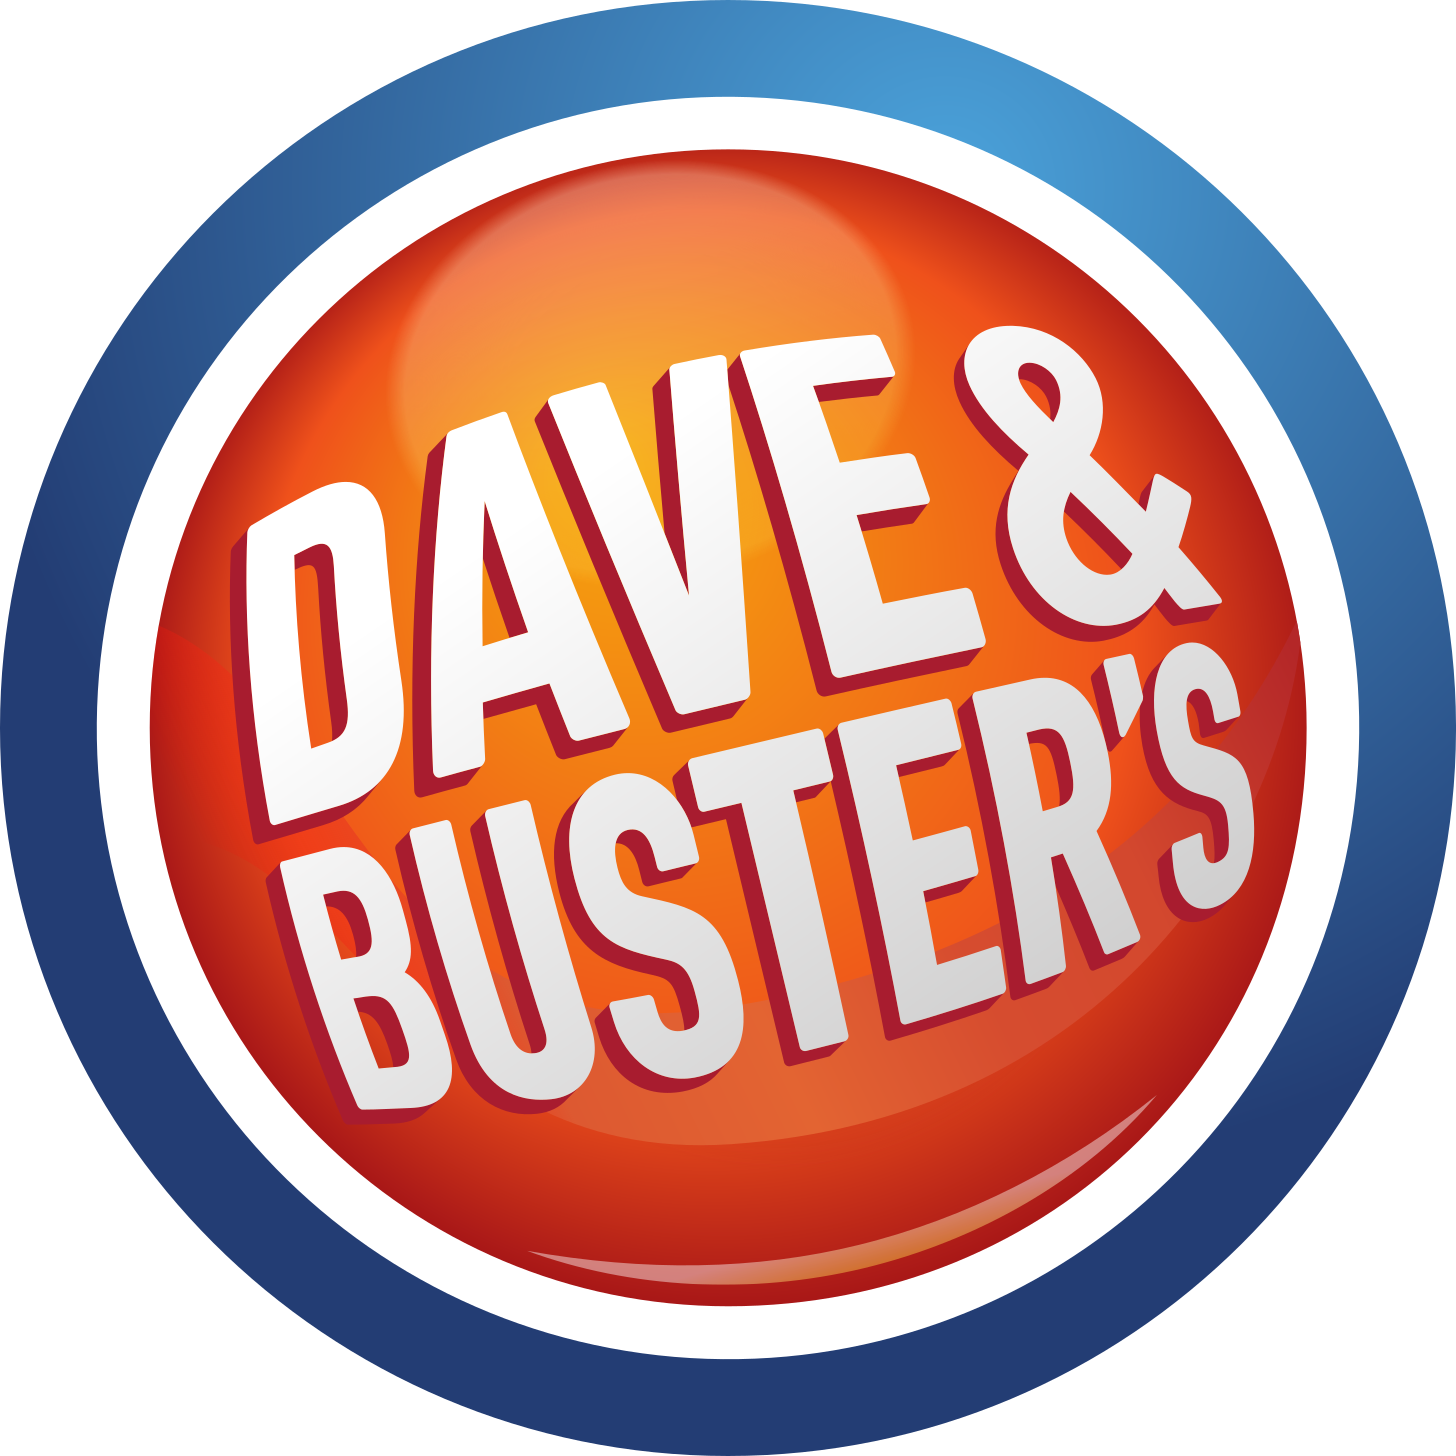 File:Dave & Buster's 2014.svg - Wikipedia